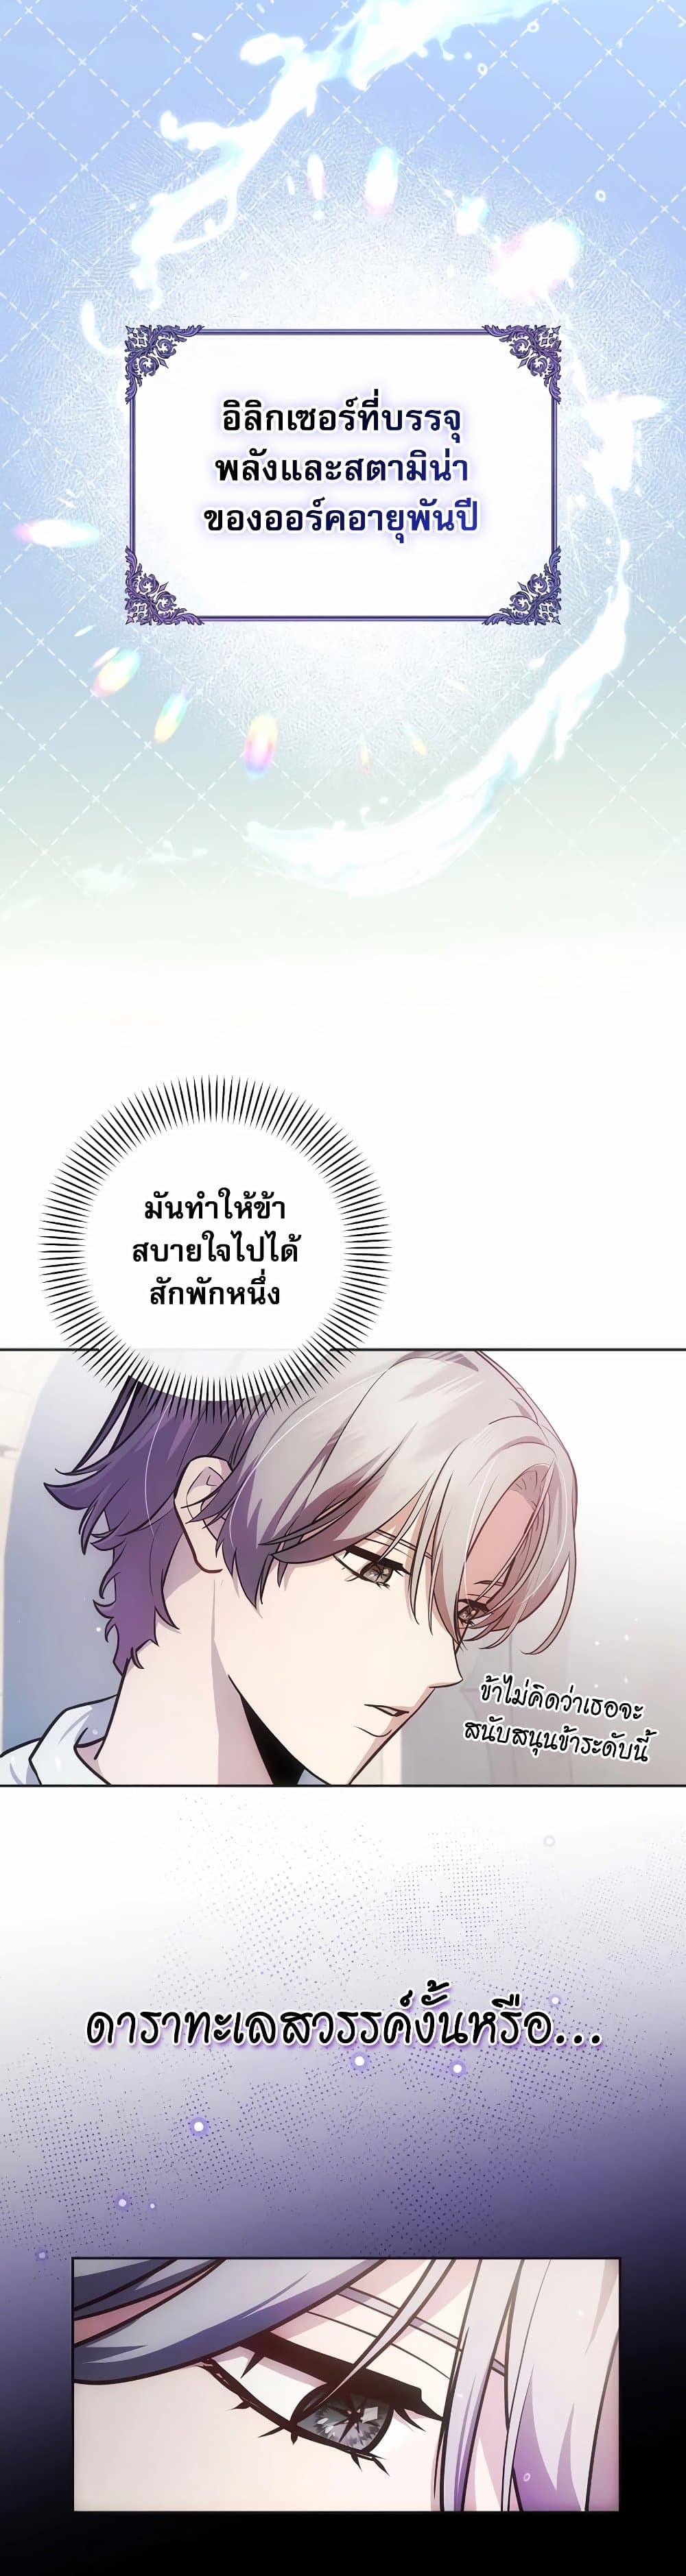 I Became the Youngest Prince in the Novel 5-5